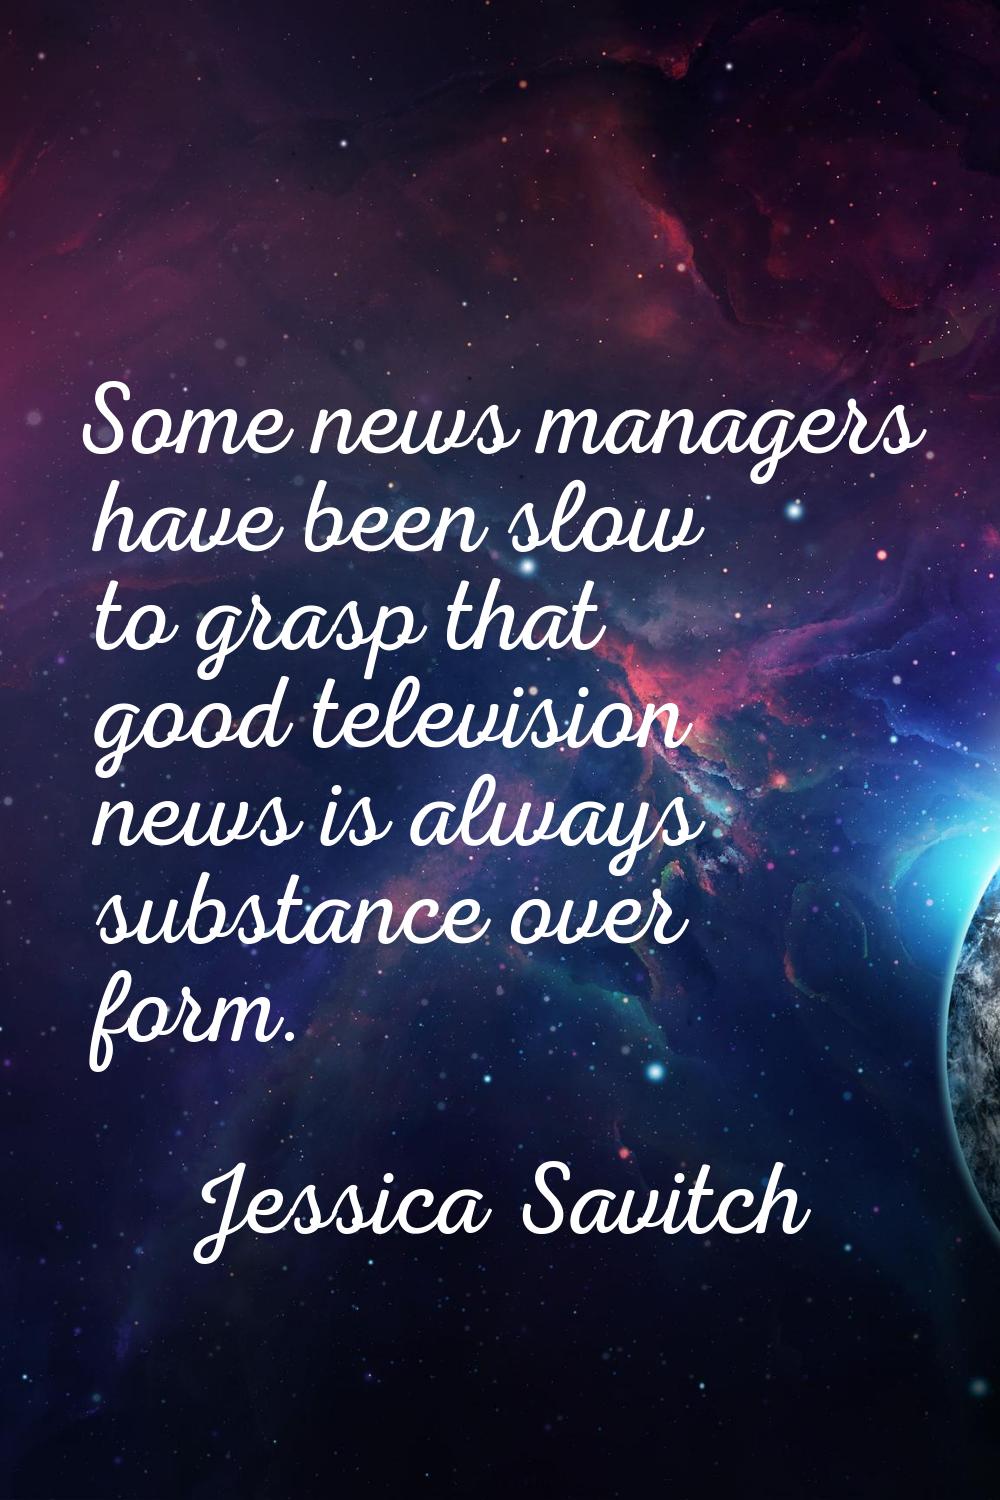 Some news managers have been slow to grasp that good television news is always substance over form.